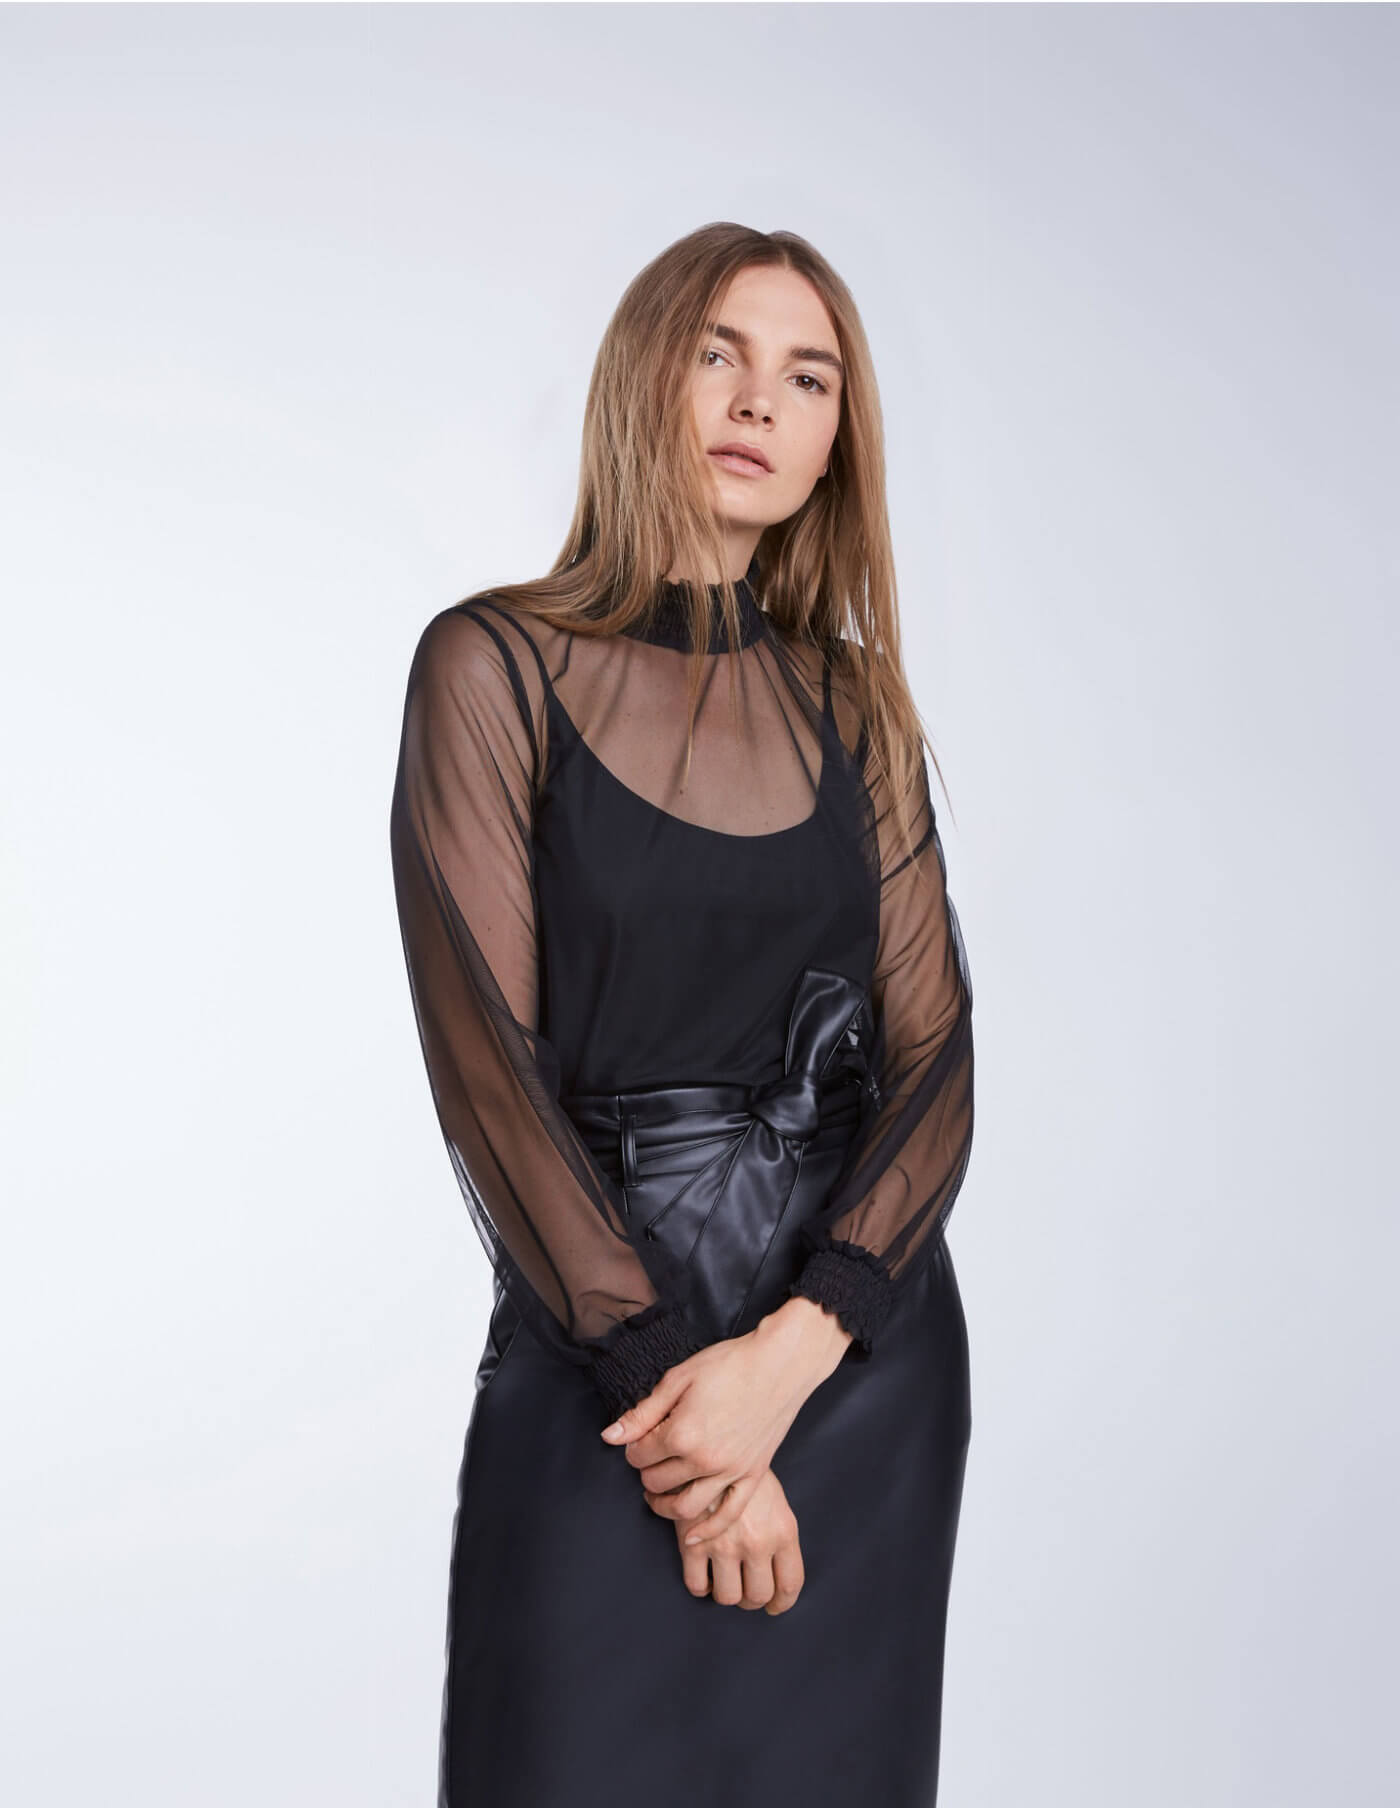 anthony cooperwood recommends See Through Blouse